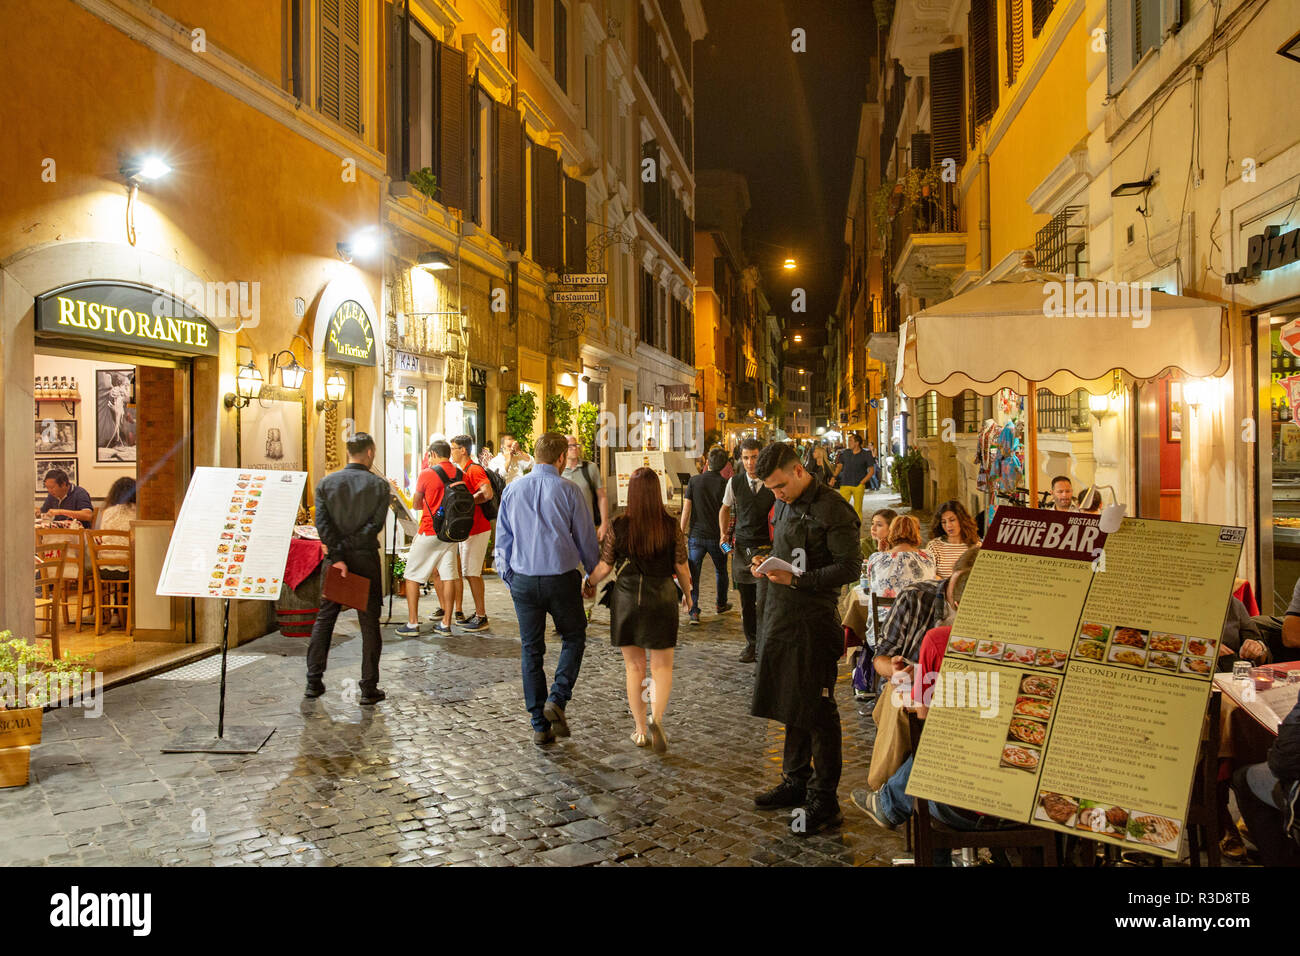 Night time scene in Rome as people walk along cobbled street looking for a restaurant or cafe for dinner, Rome,Italy,Europe Stock Photo